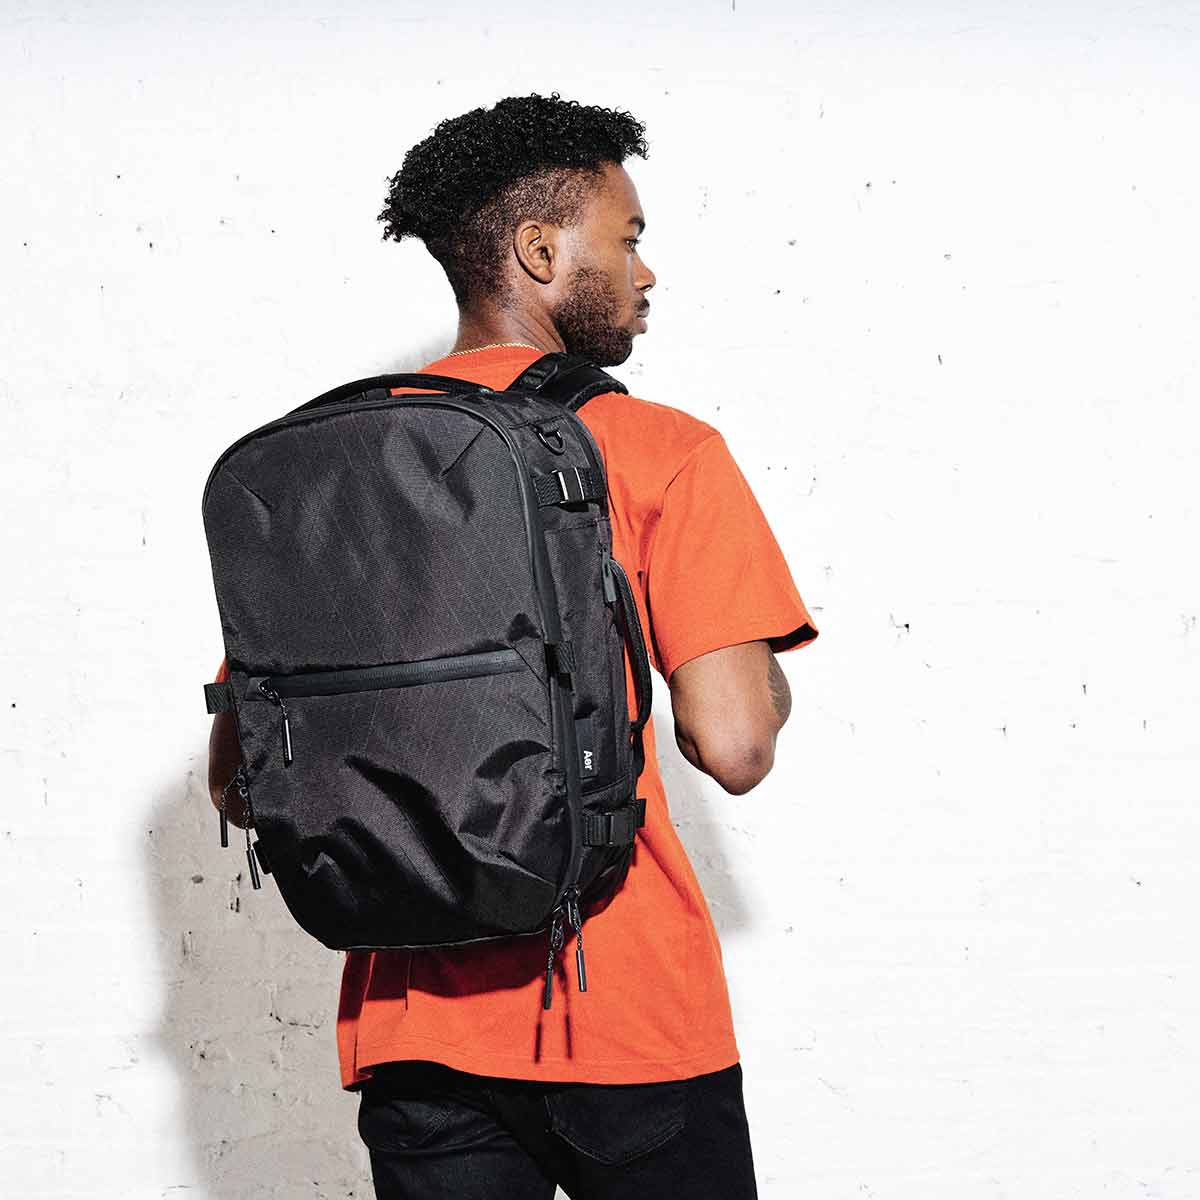 Aer Travel Pack 3 small x-pac 新品　バックパック